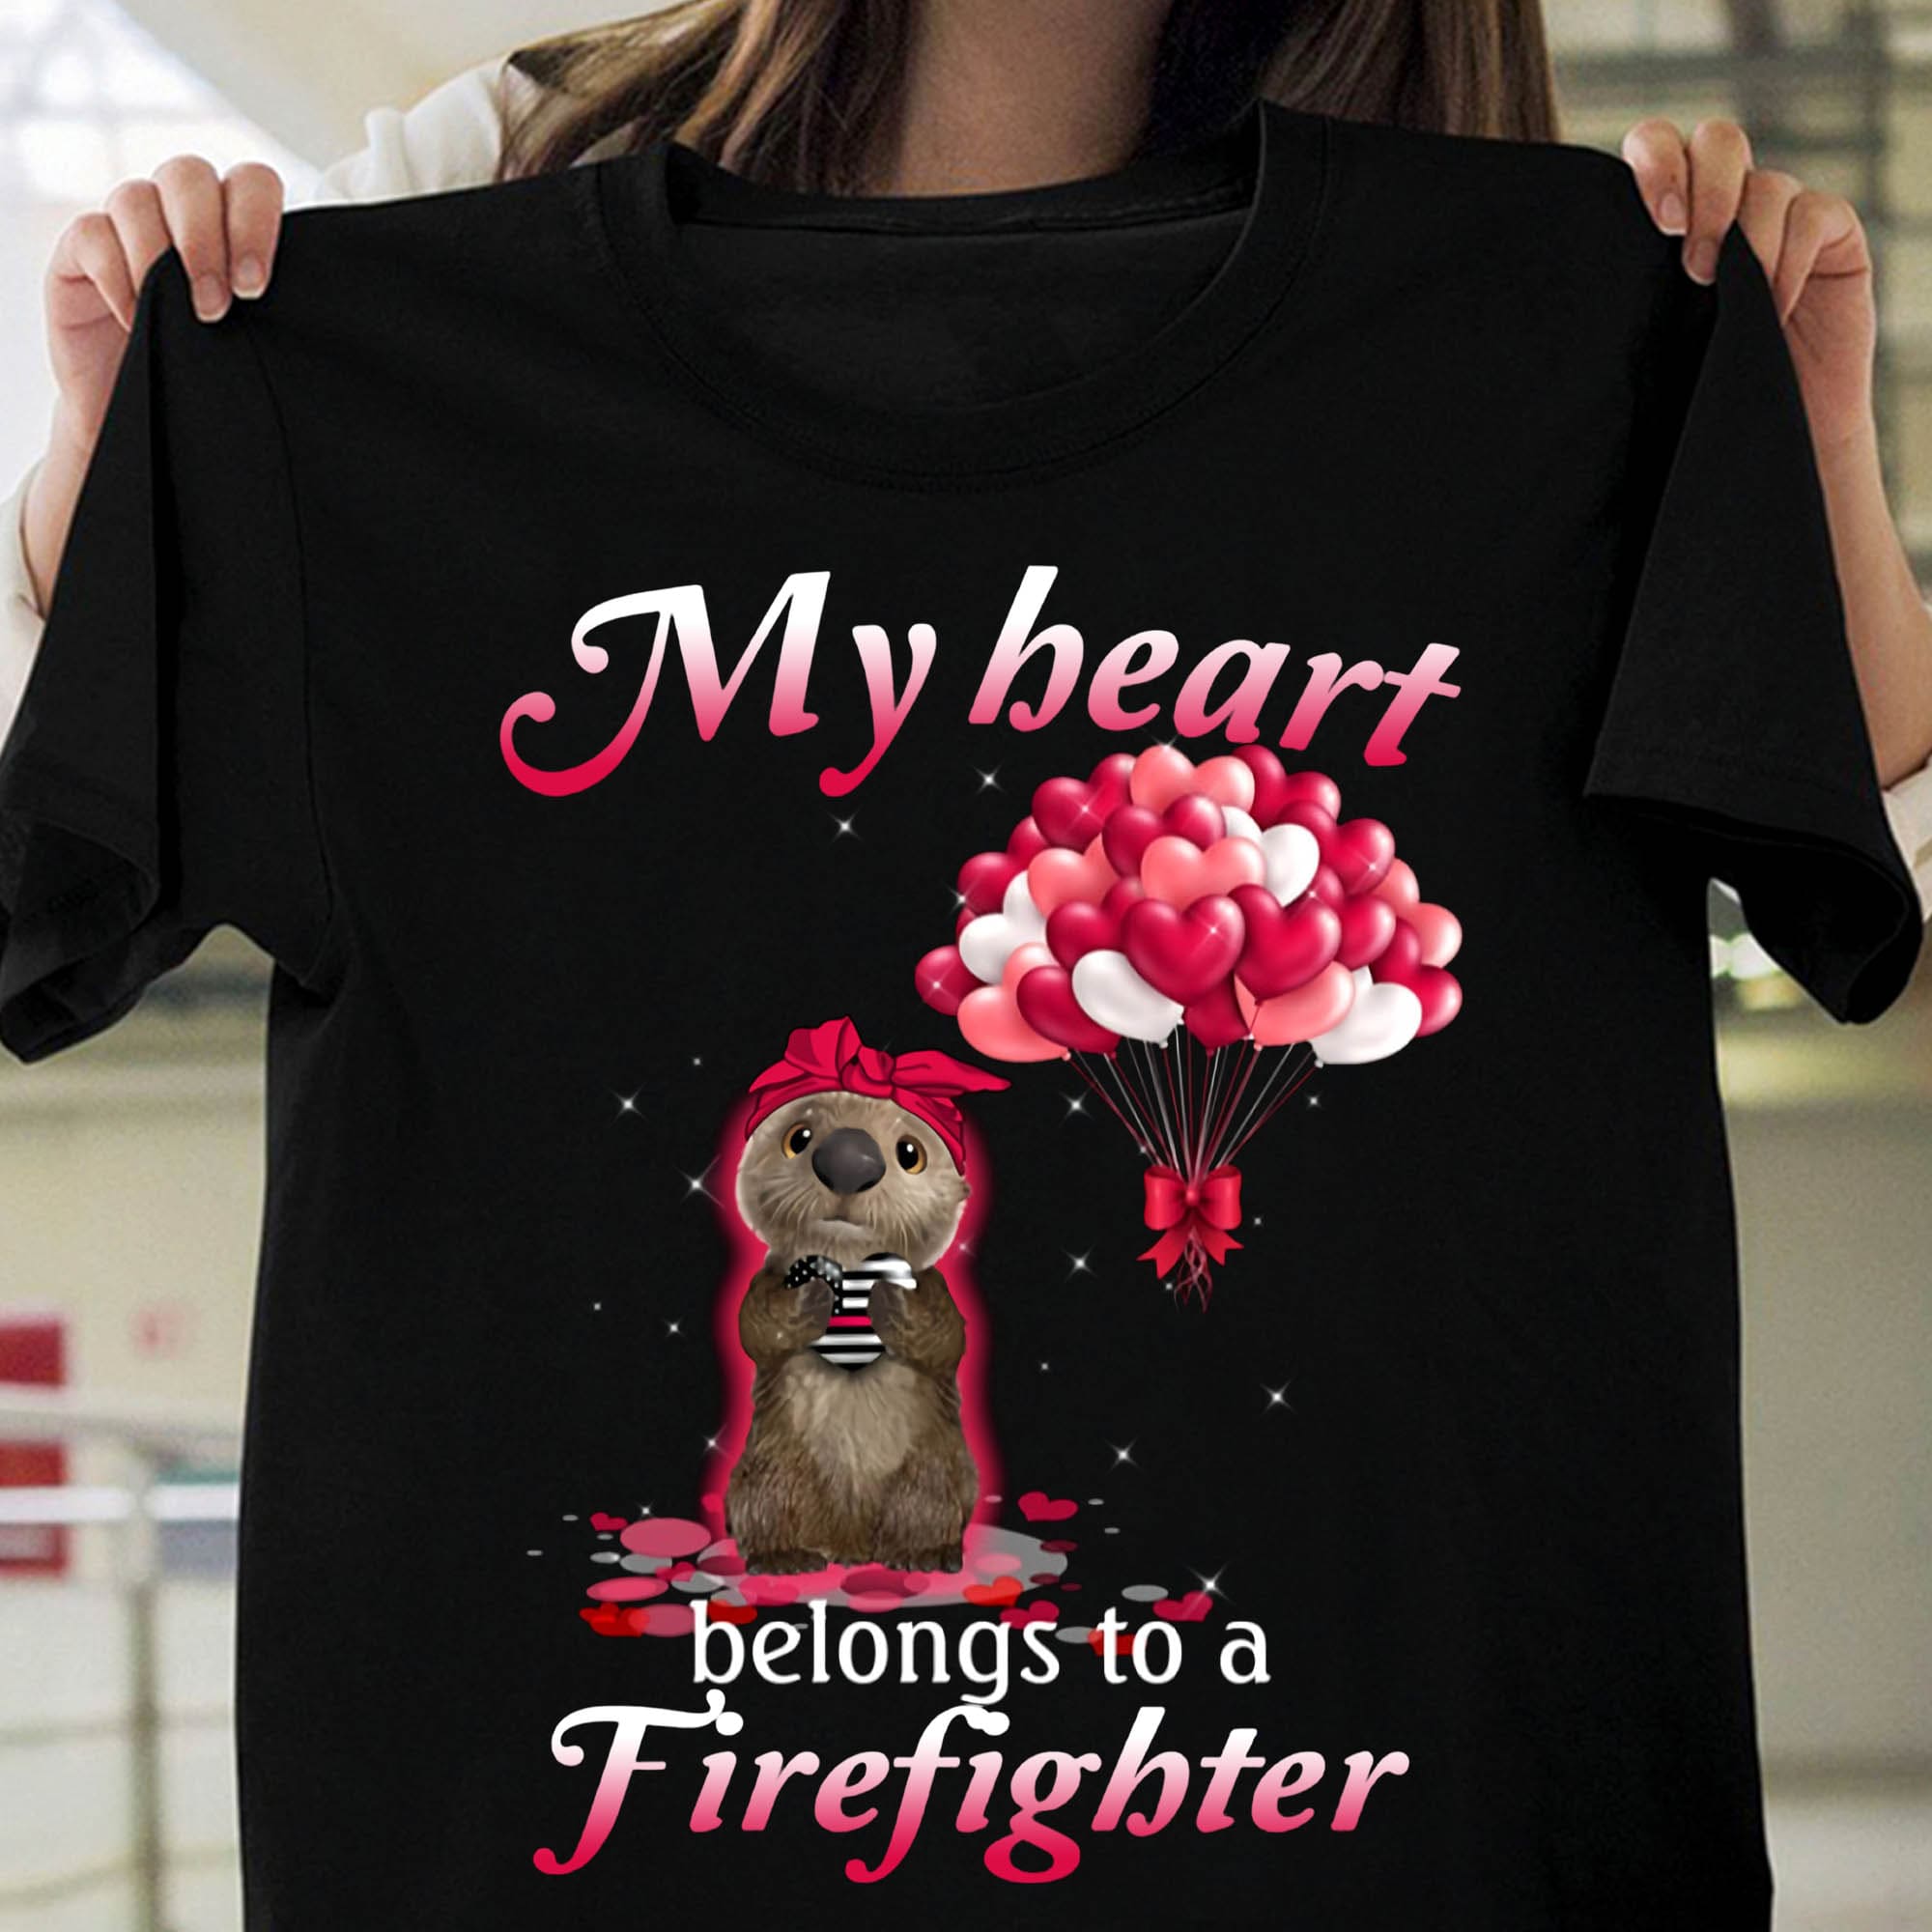 My heart belongs to a firefighter - Valentine gift for firefighter, gorgeous beaver